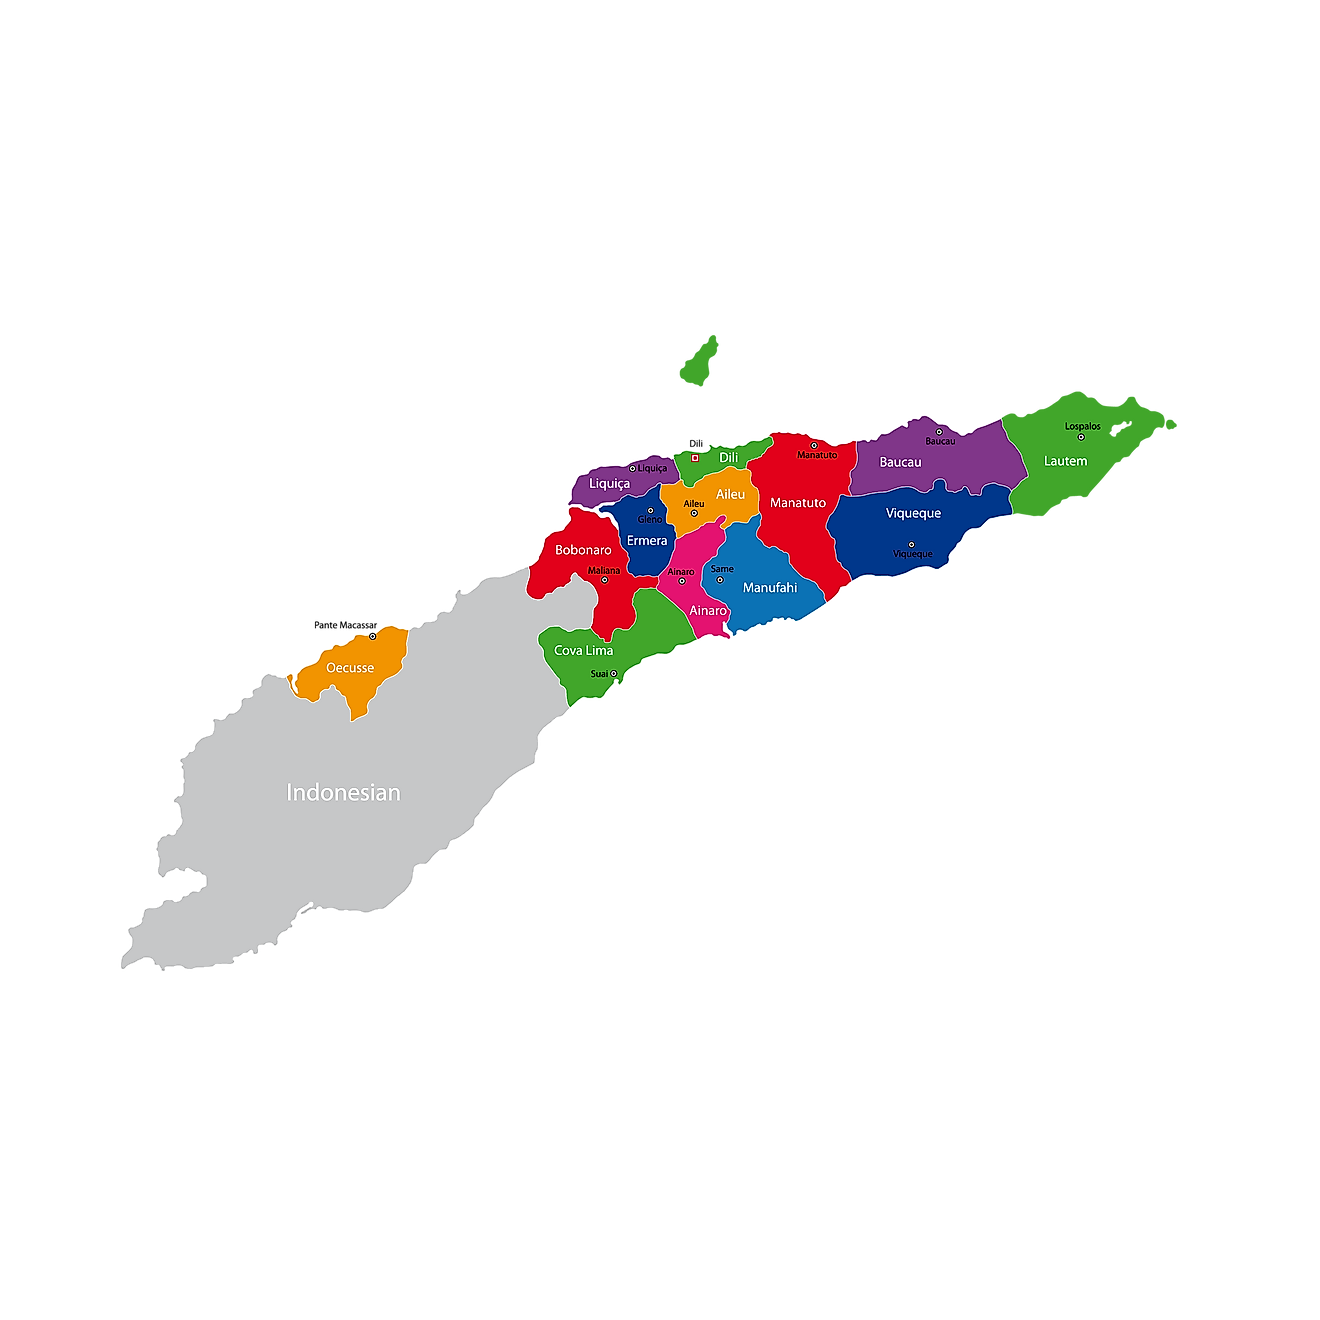 Political Map of Timor Leste showing the 13 municipalities, their capitals, and the national capital of Dili.